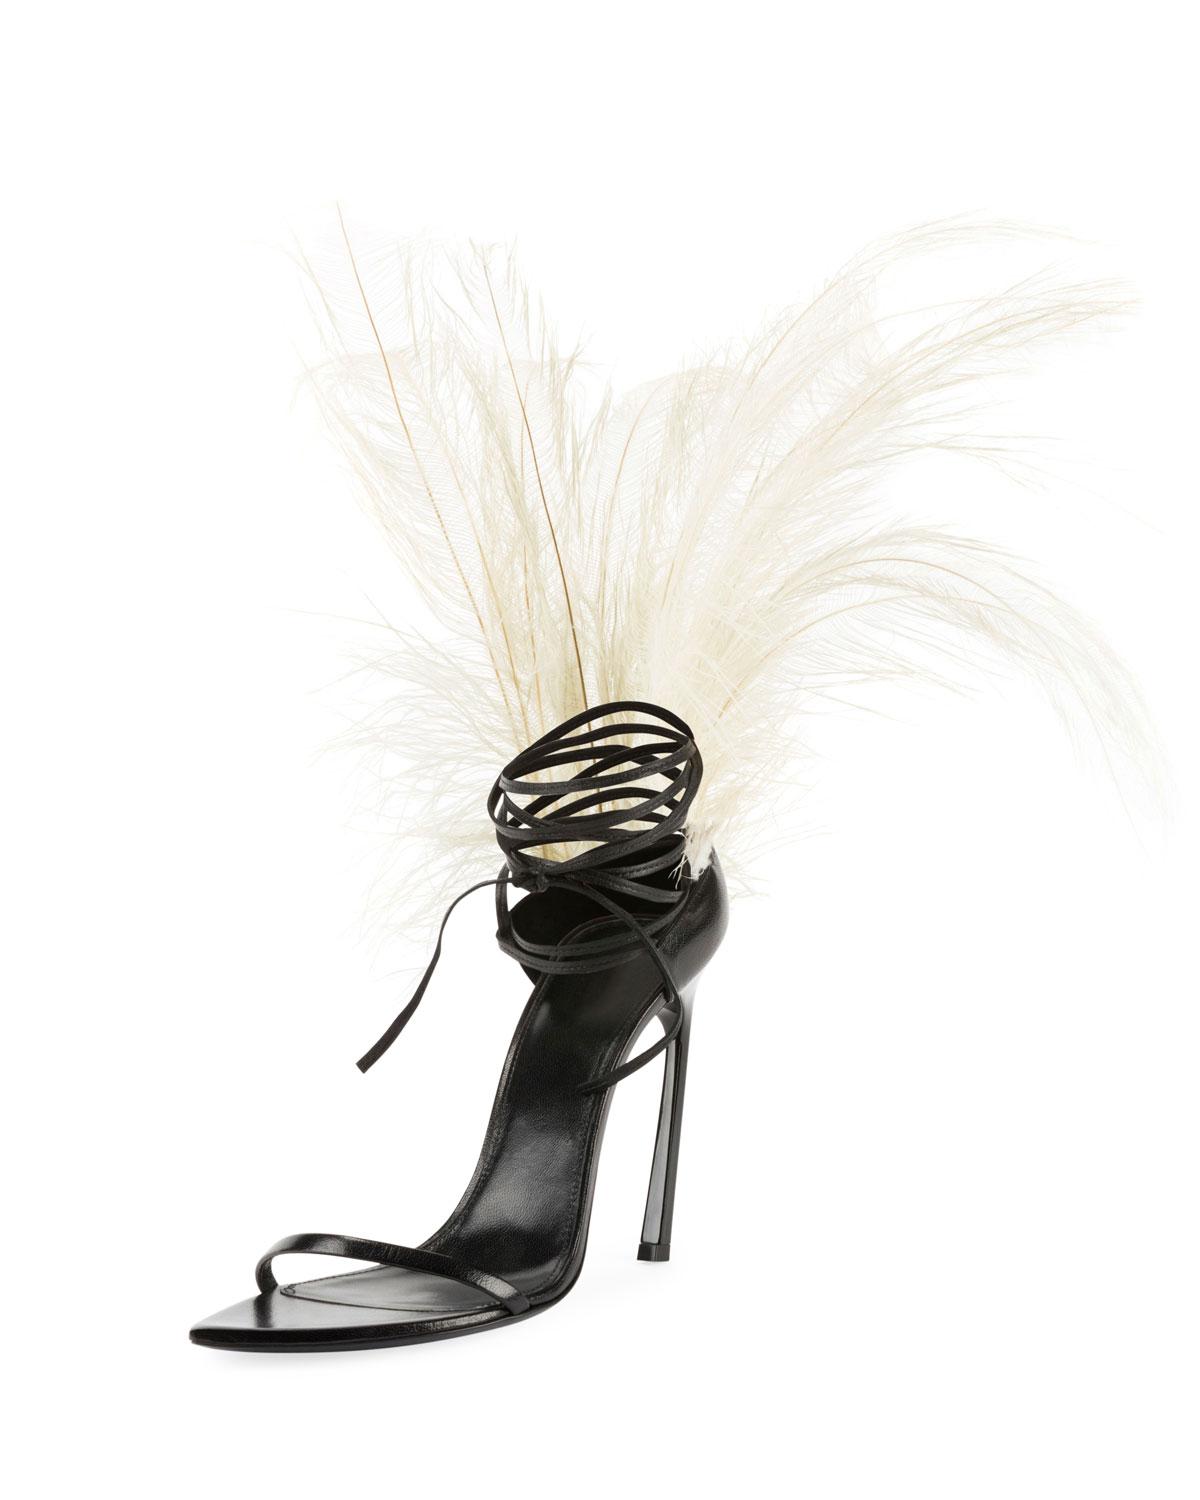 ysl heels with feathers